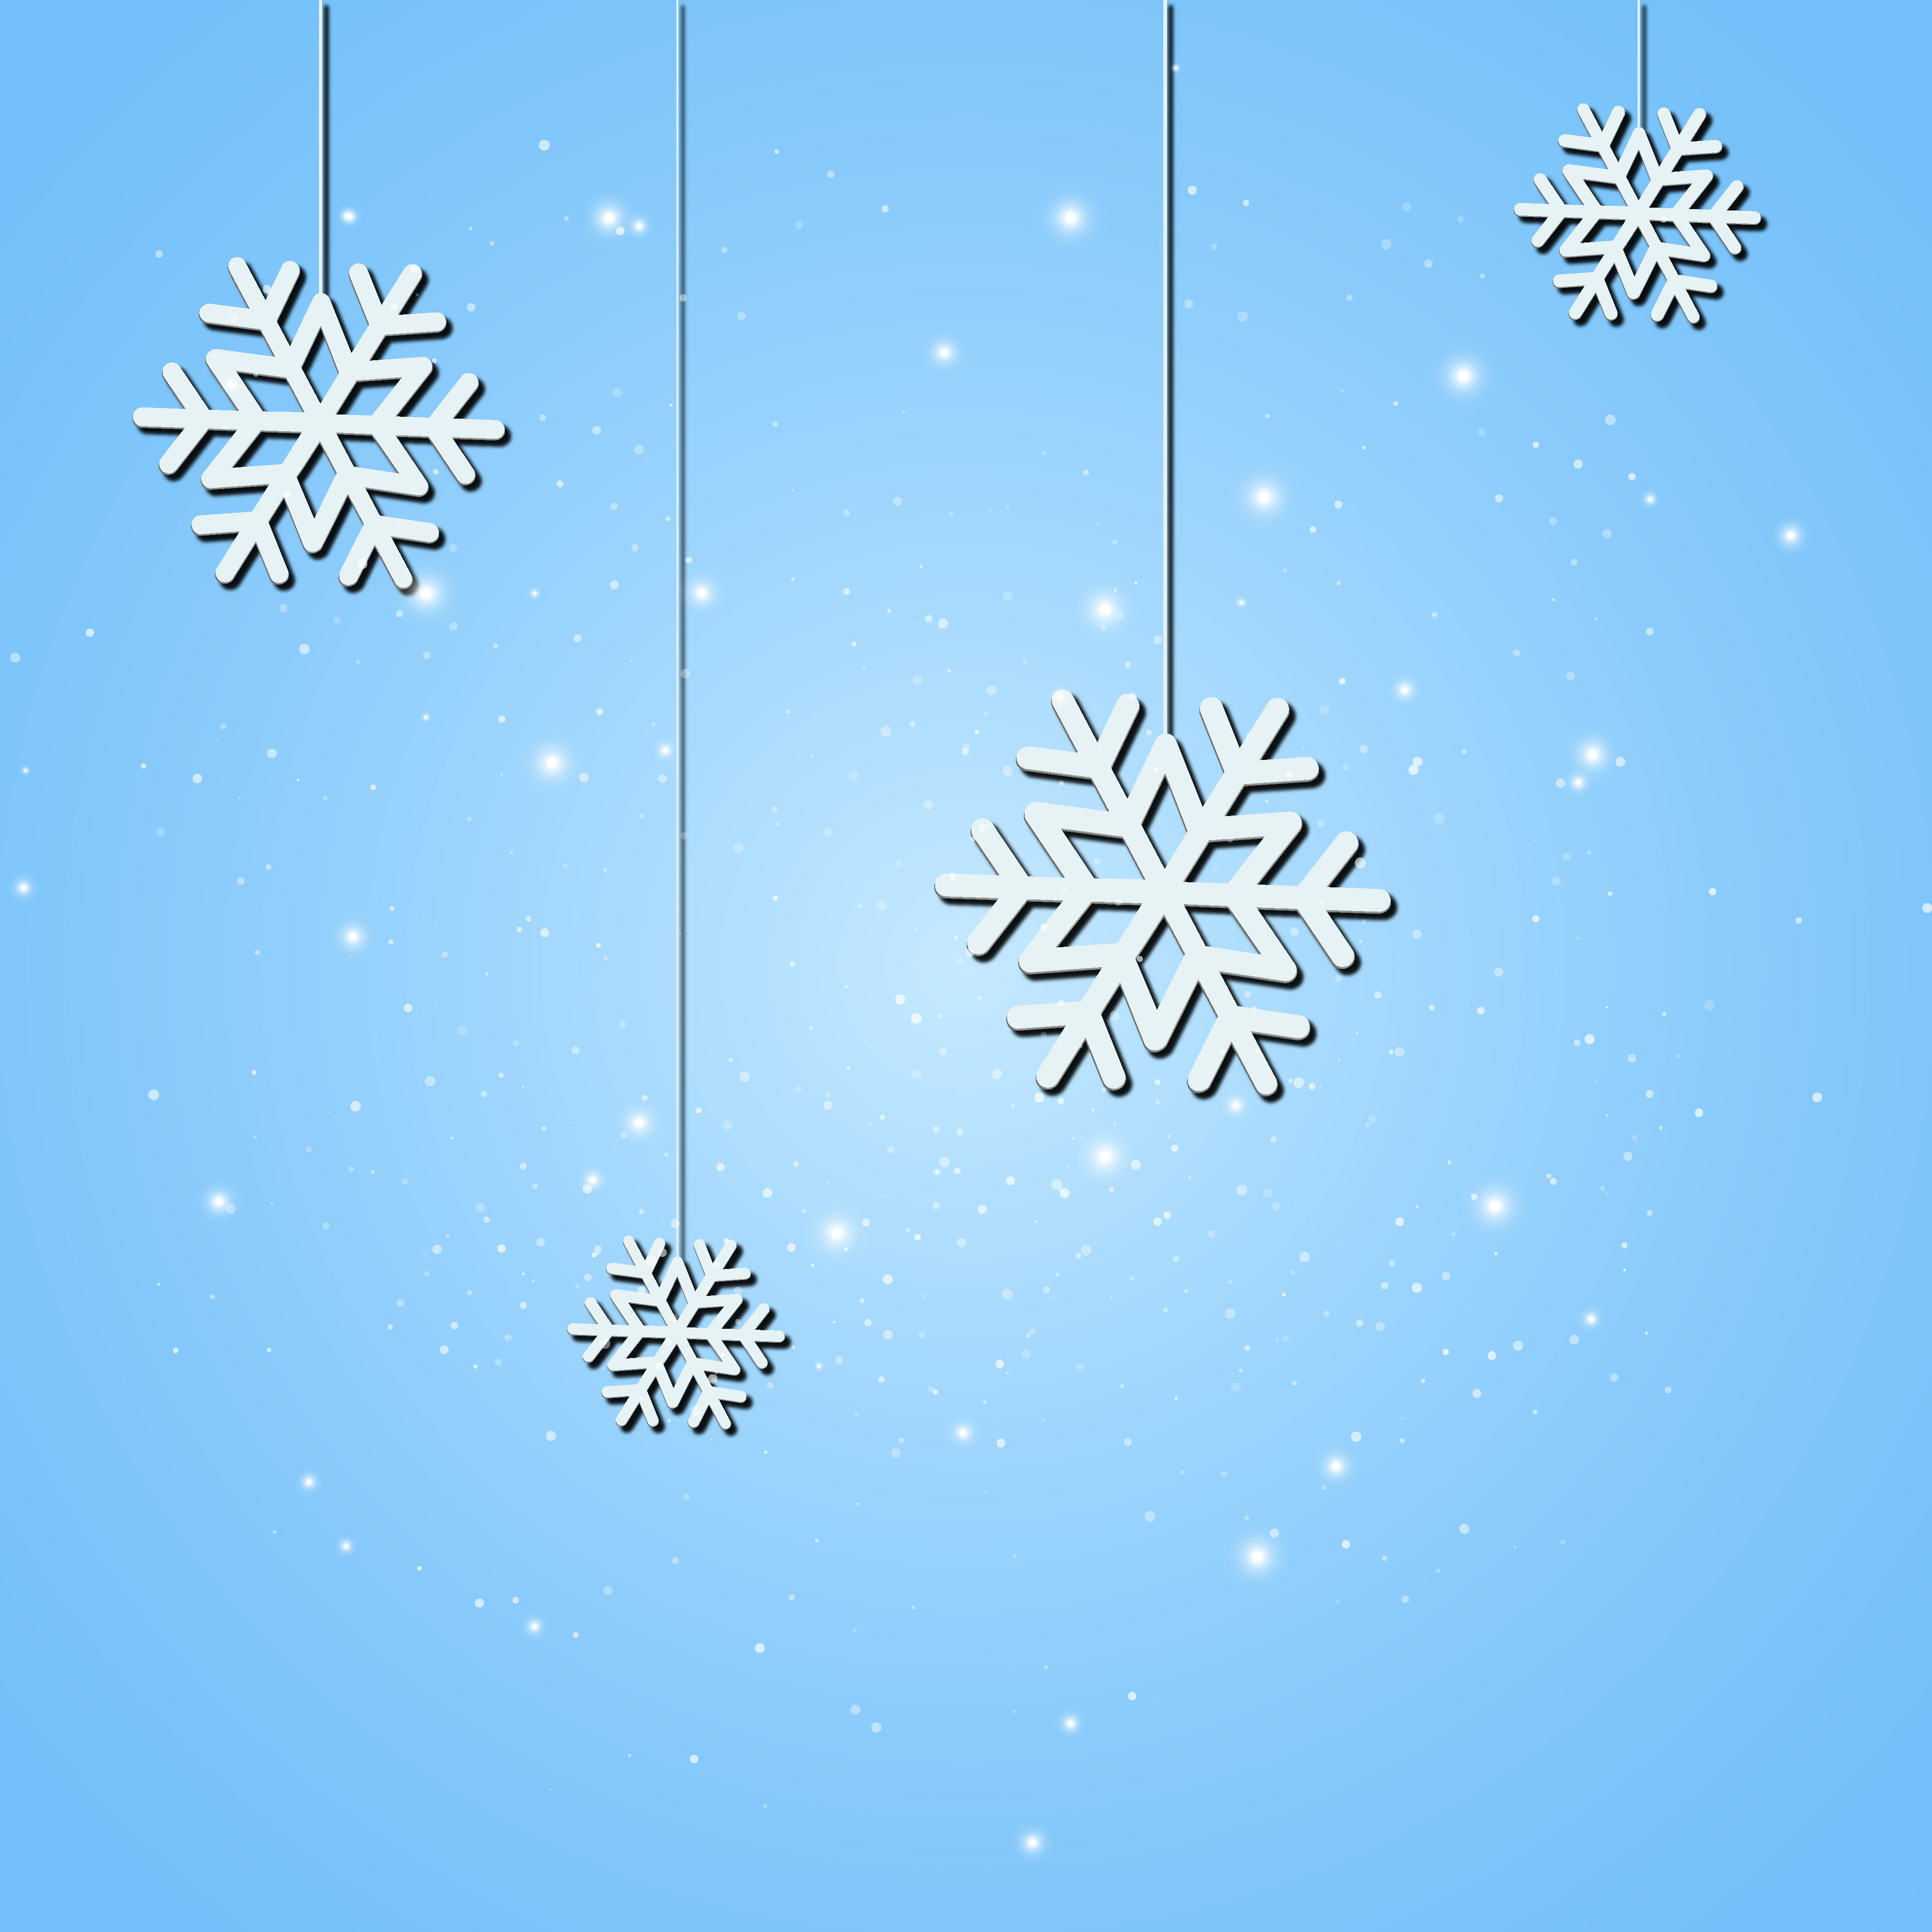 Free vector snow flake with light effects in background rendition image